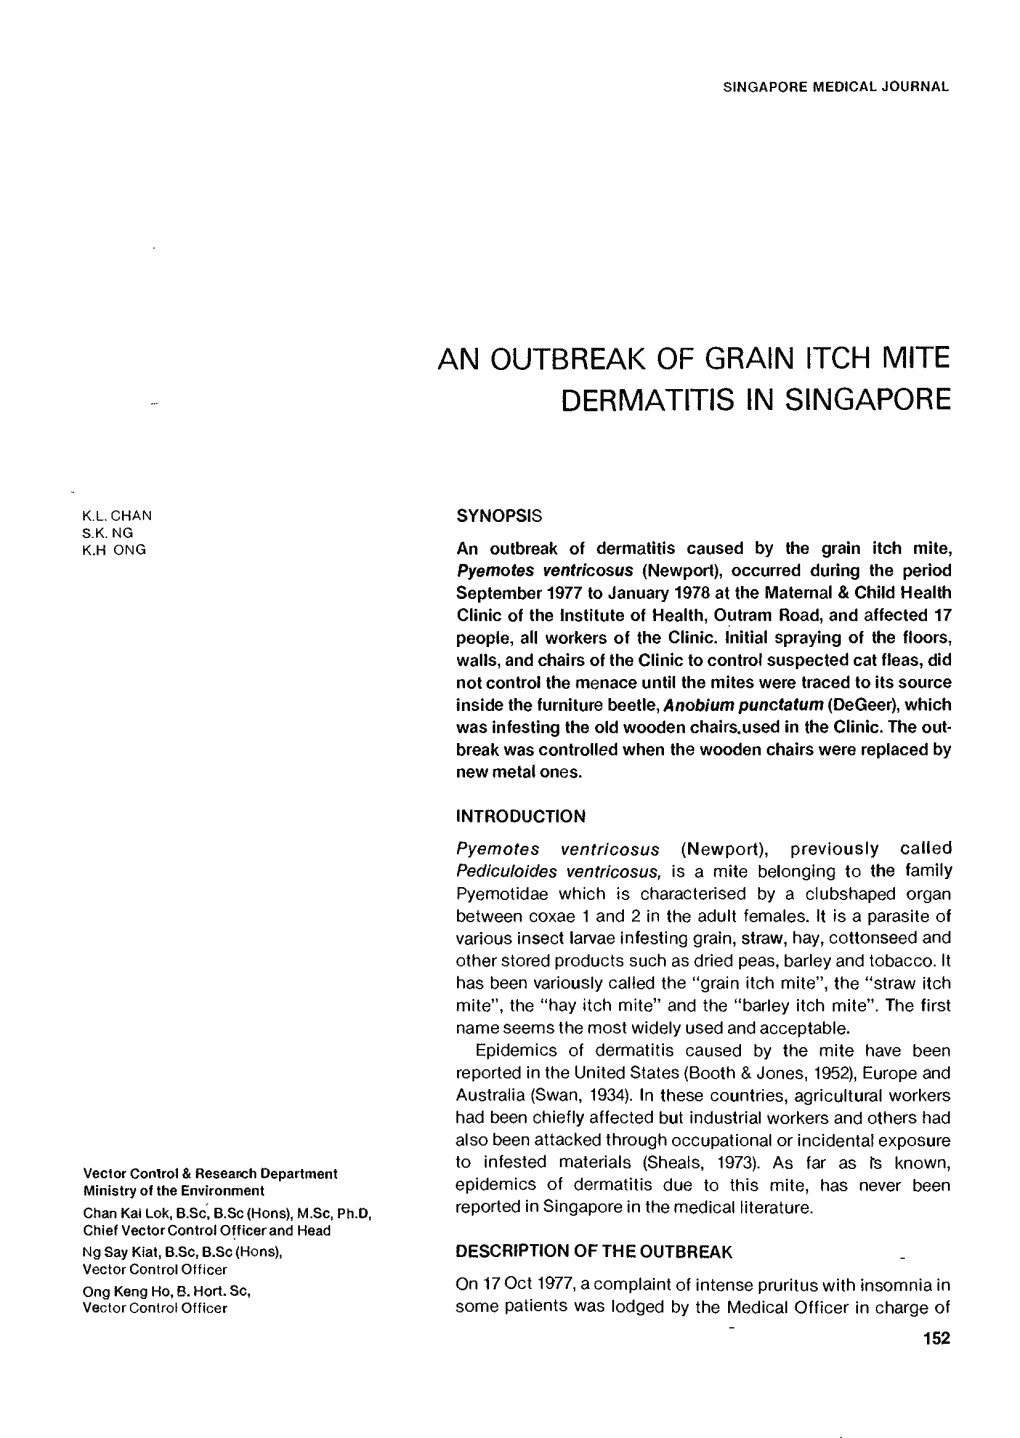 An Outbreak of Grain Itch Mite Dermatitis in Singapore